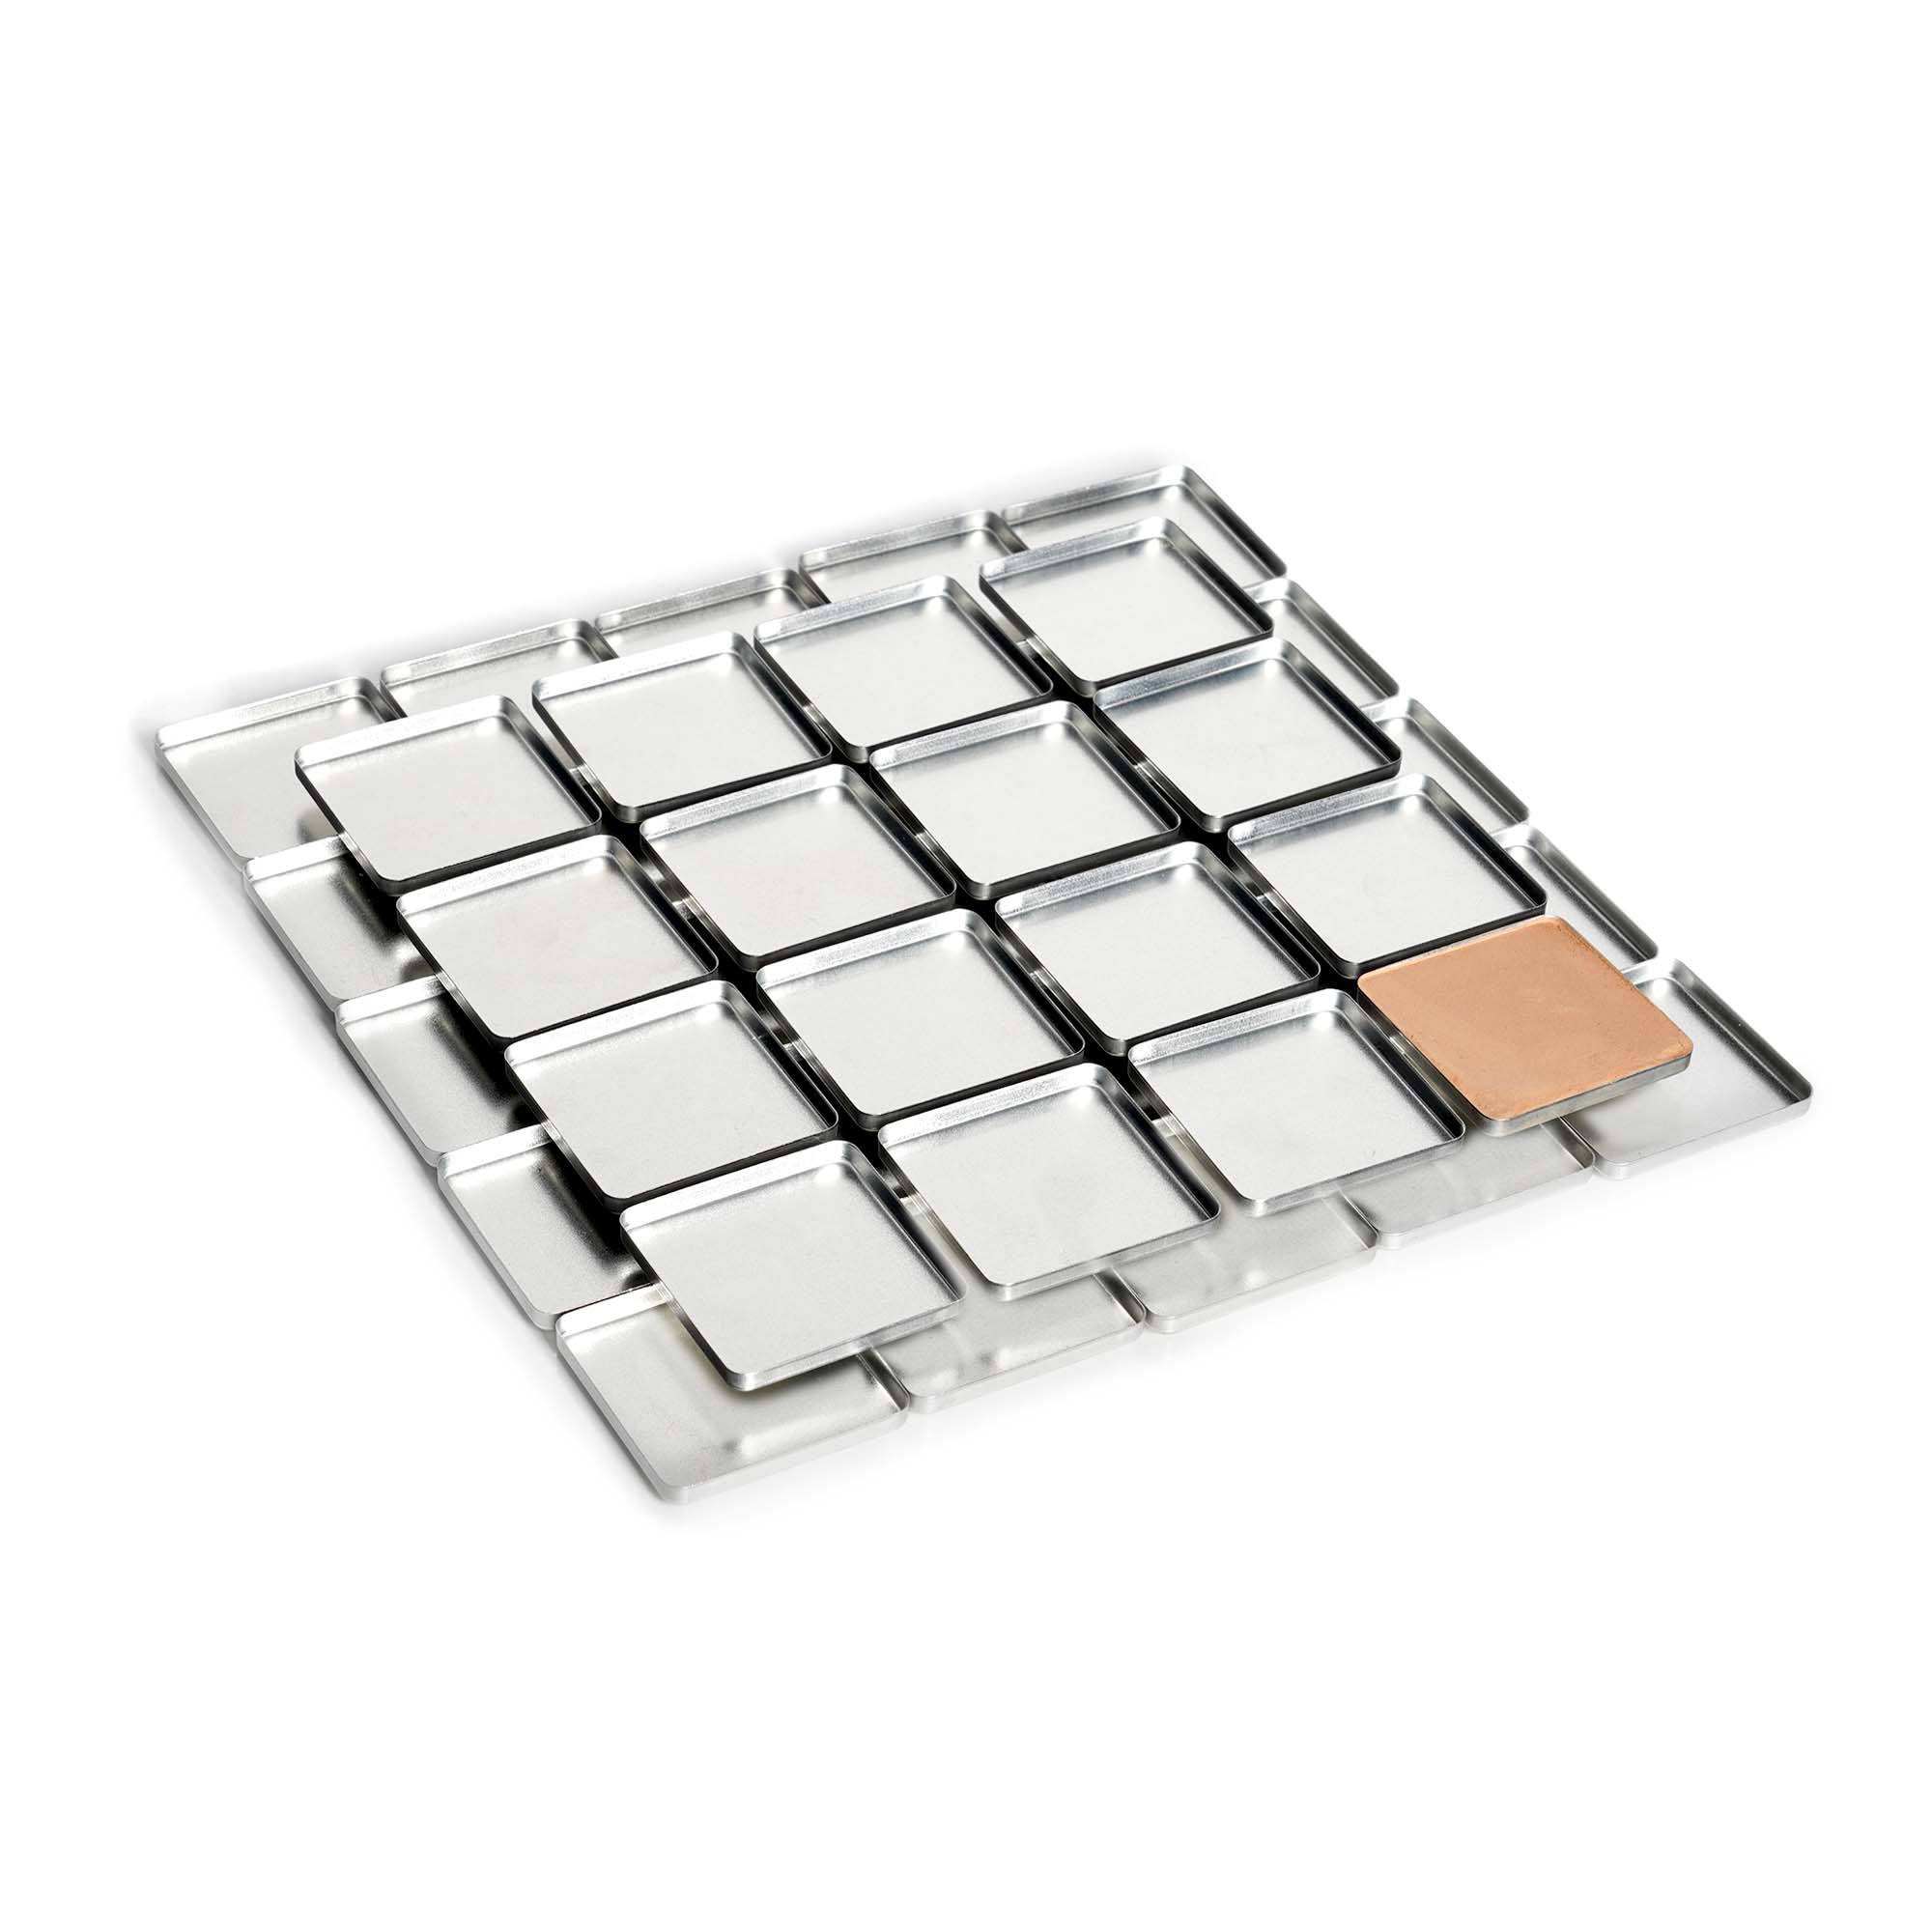 Forty 40 square-shaped refill empty magnetic makeup pans, each measuring 41x41mm, for the FIXY Broken Makeup Repressing System, showcasing one pan with product to illustrate usage, ideal for repairing and customizing makeup